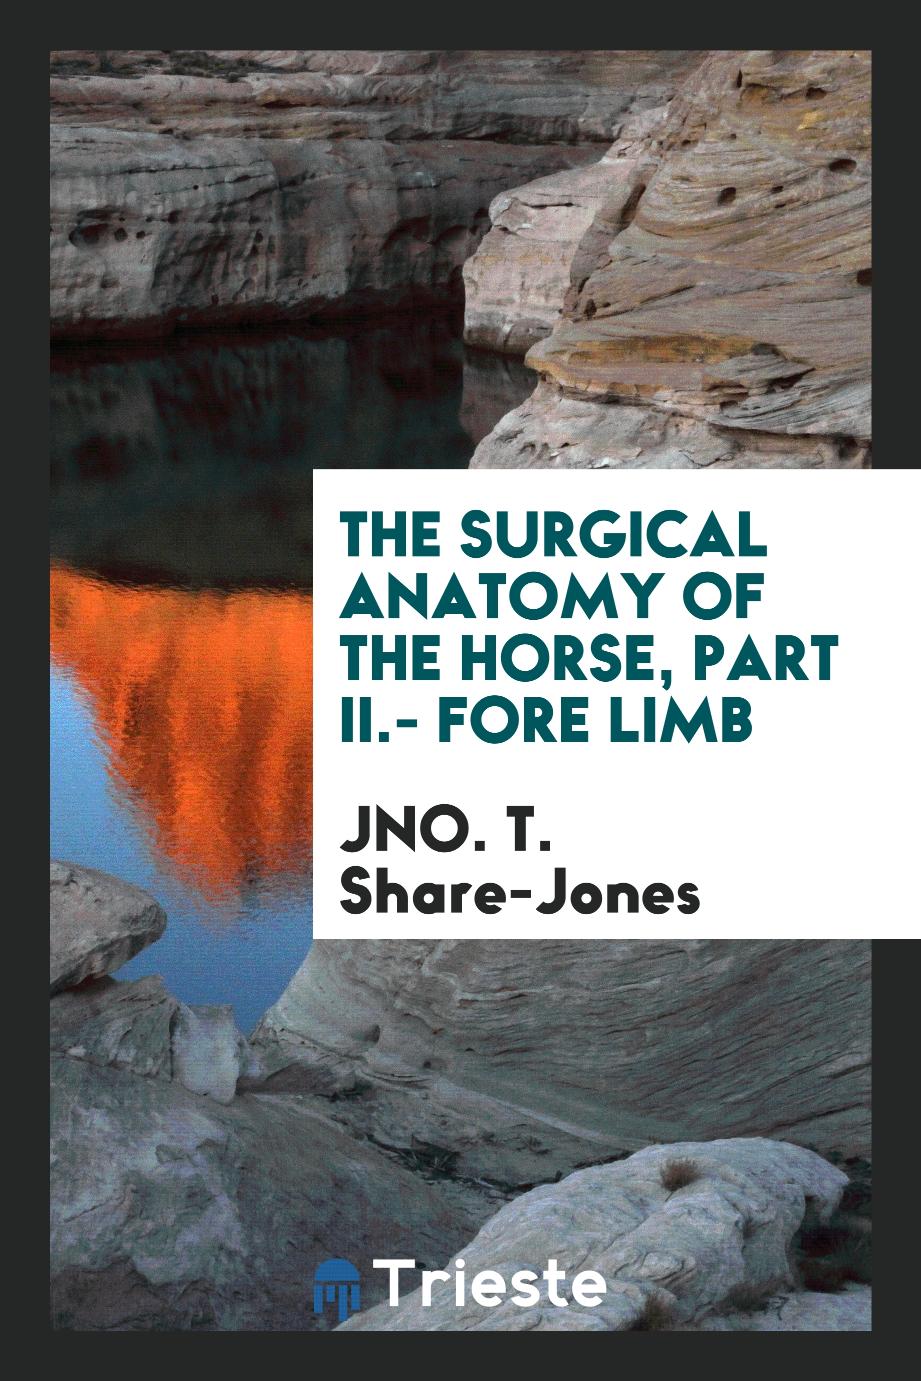 The surgical anatomy of the horse, Part II.- Fore Limb